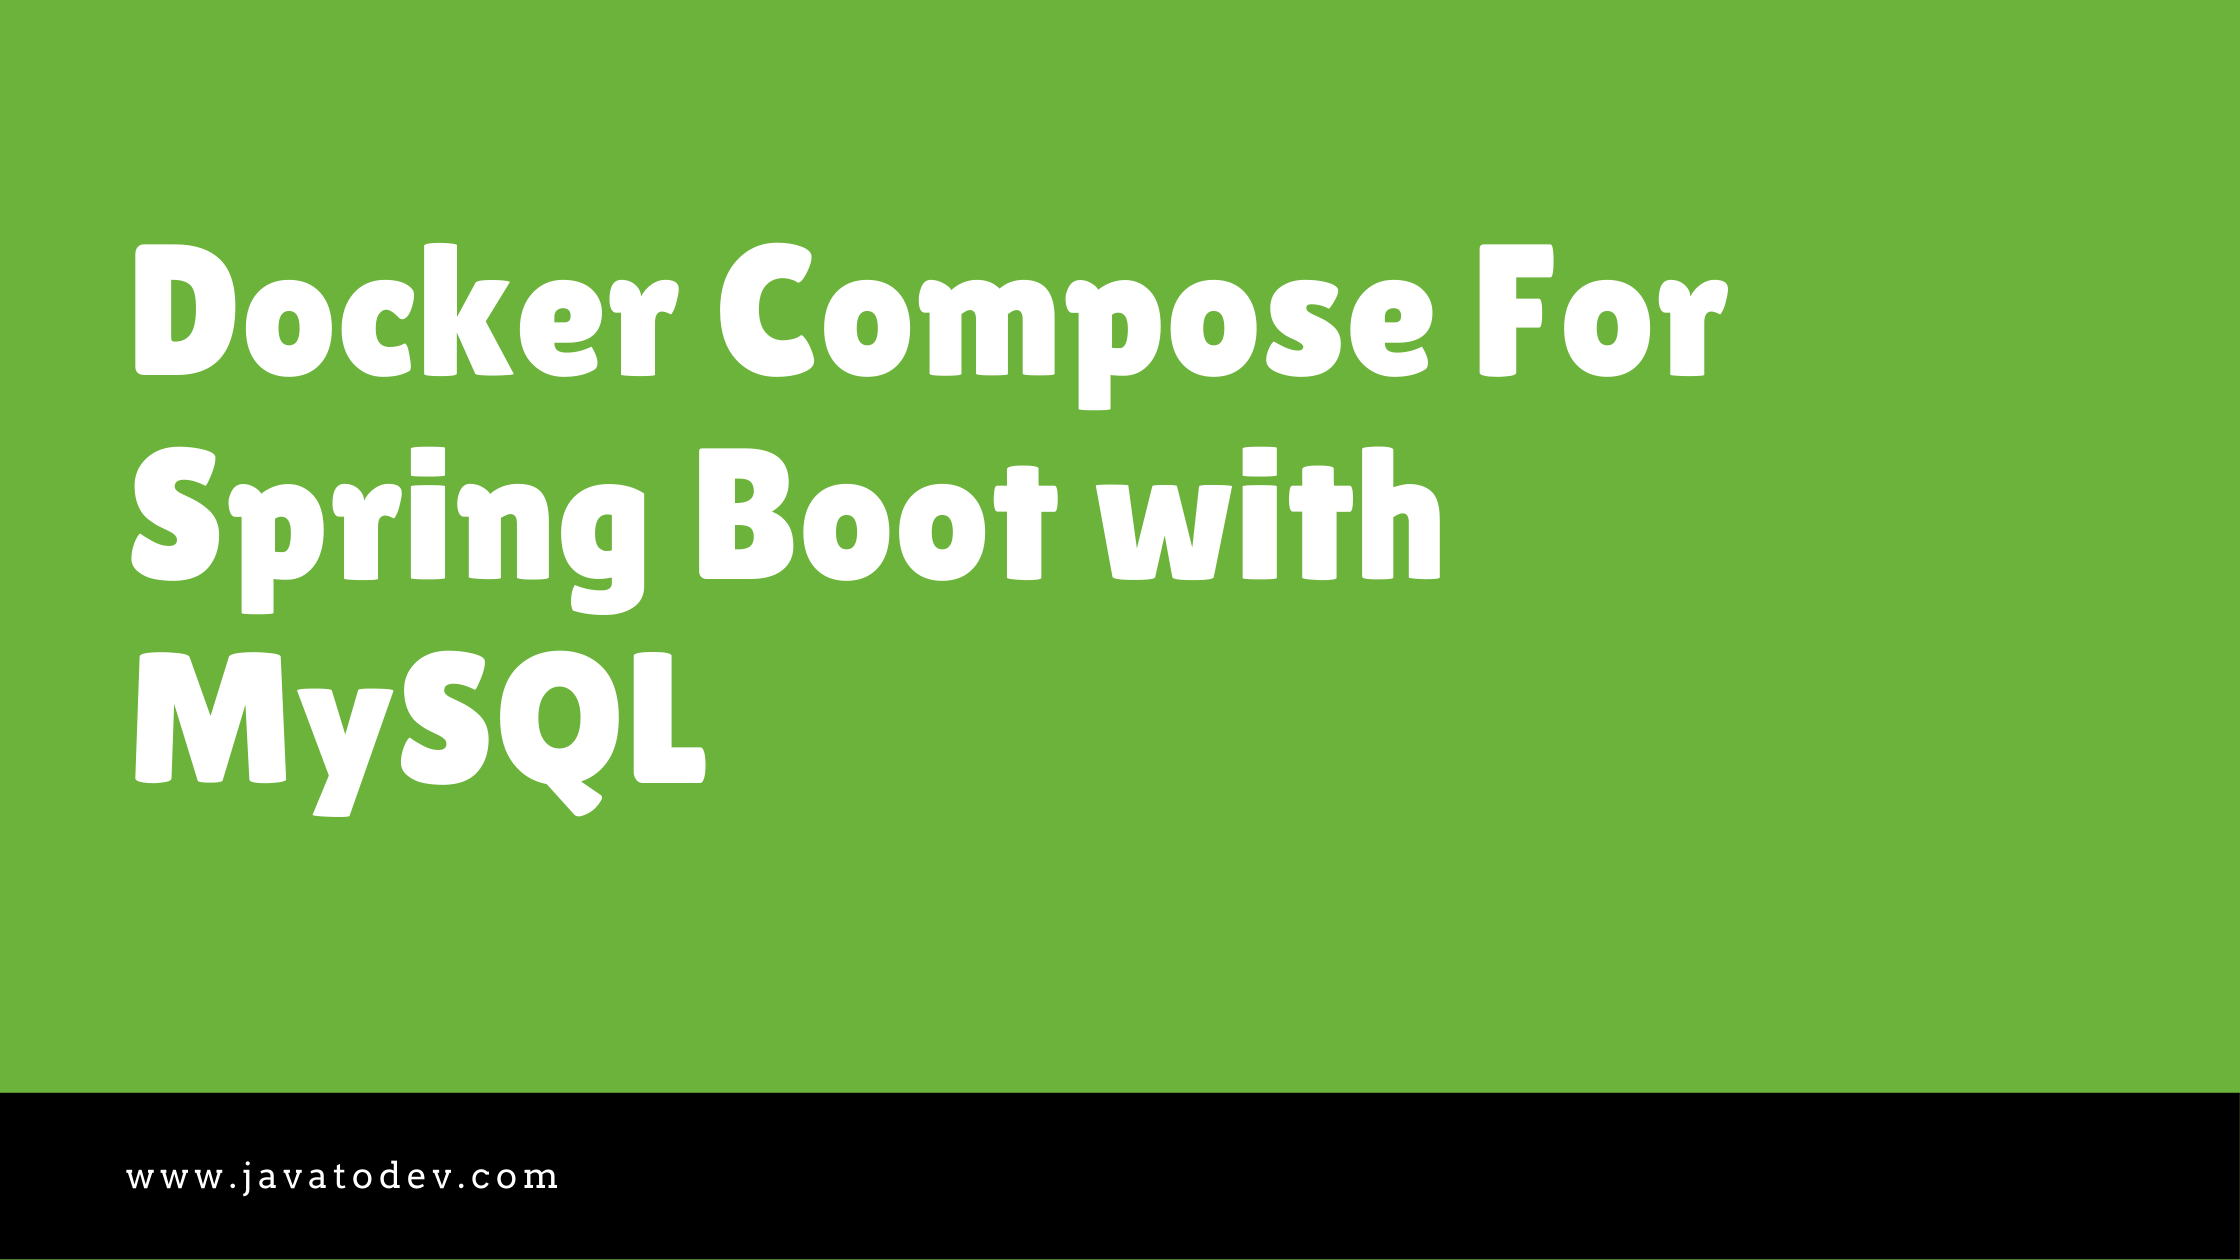 Docker Compose For Spring Boot with MySQL